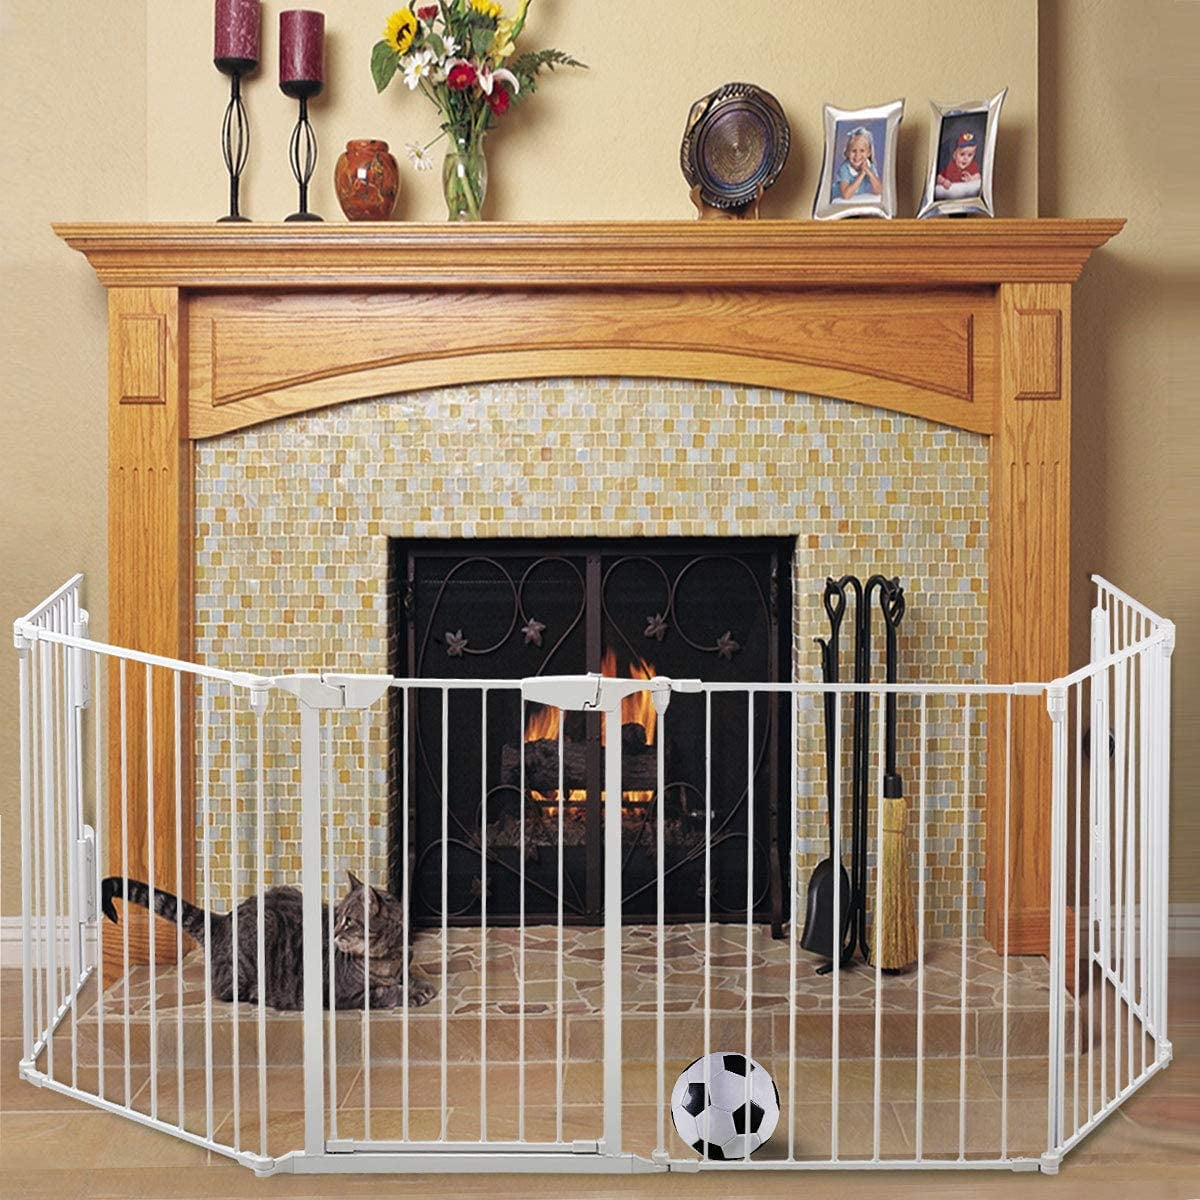 Baby Pet Dog Extra Wide Safety Metal Gate Play Yard Indoor Outdoor Child Fence 